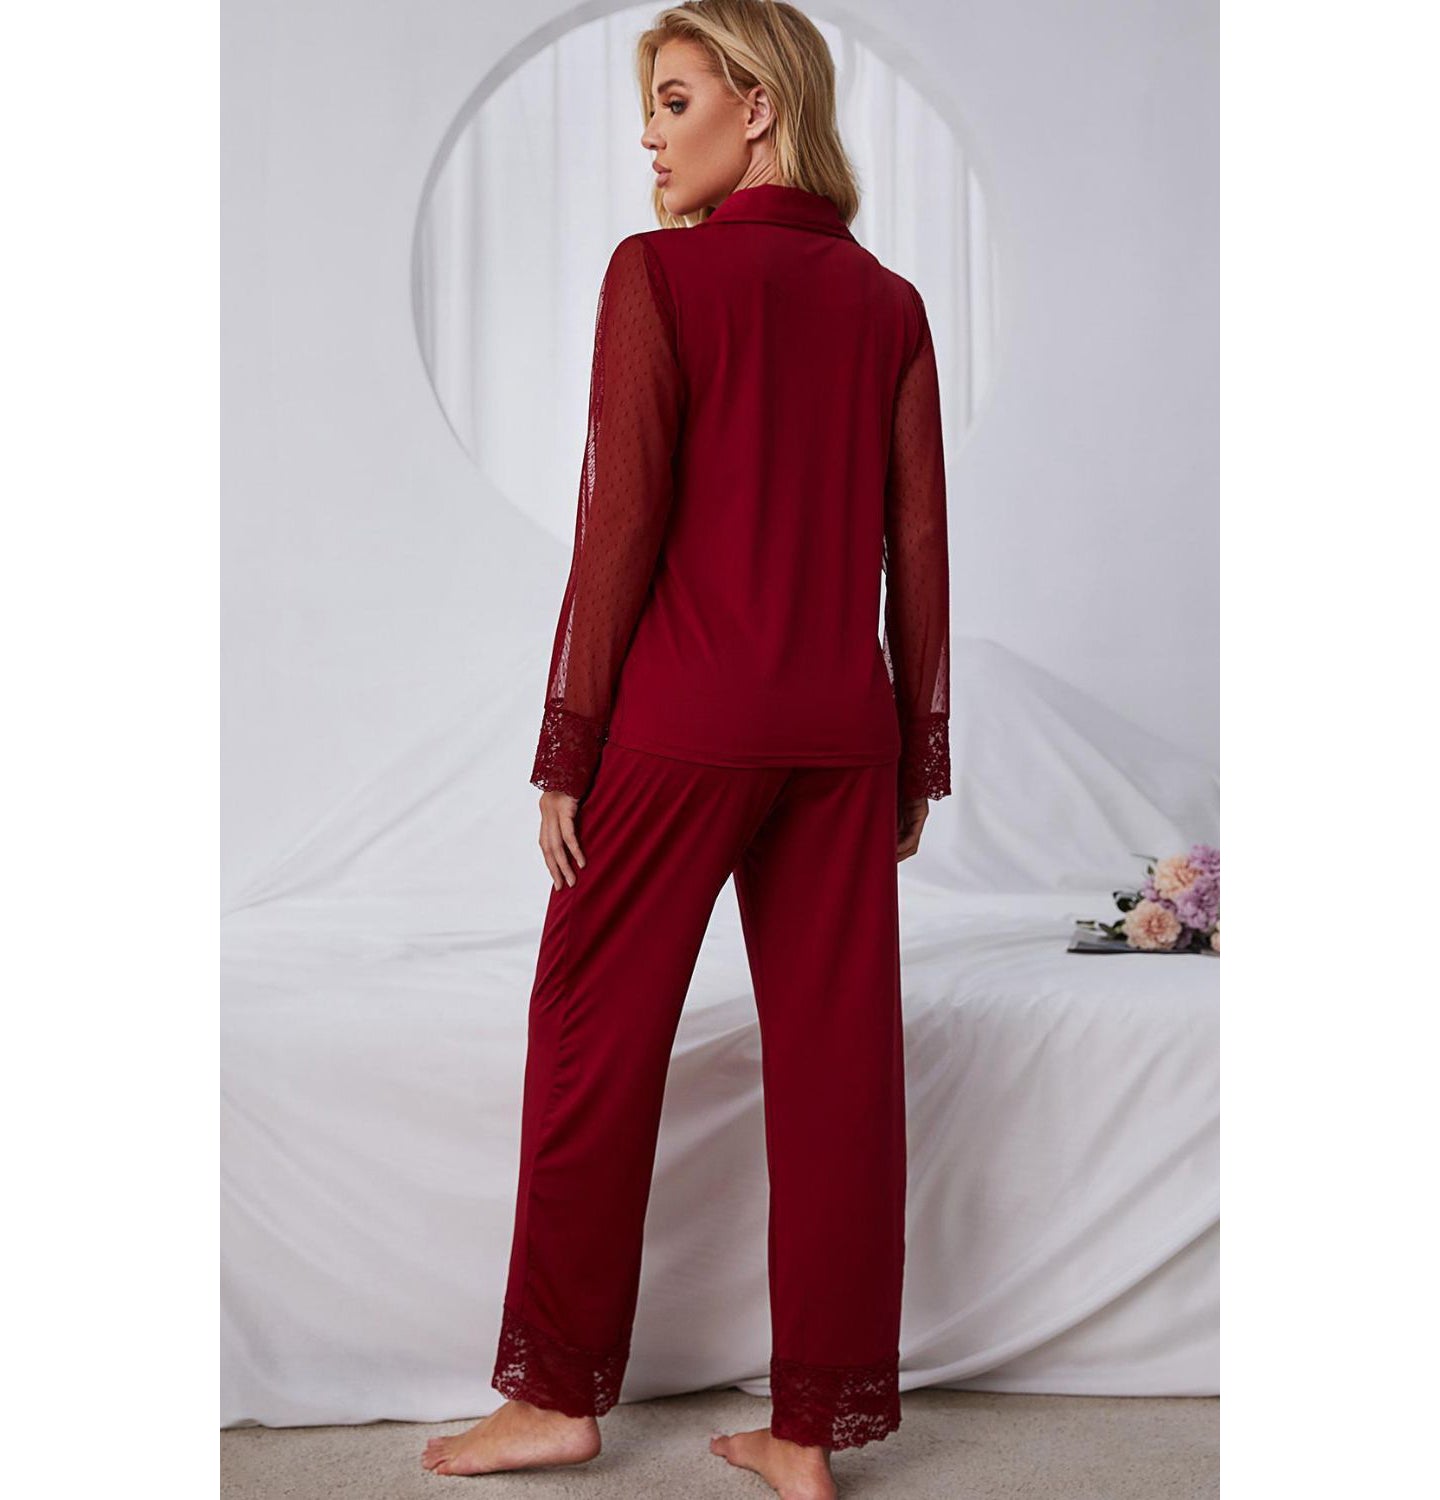 Back of model standing wearing red pajama set with lace arms